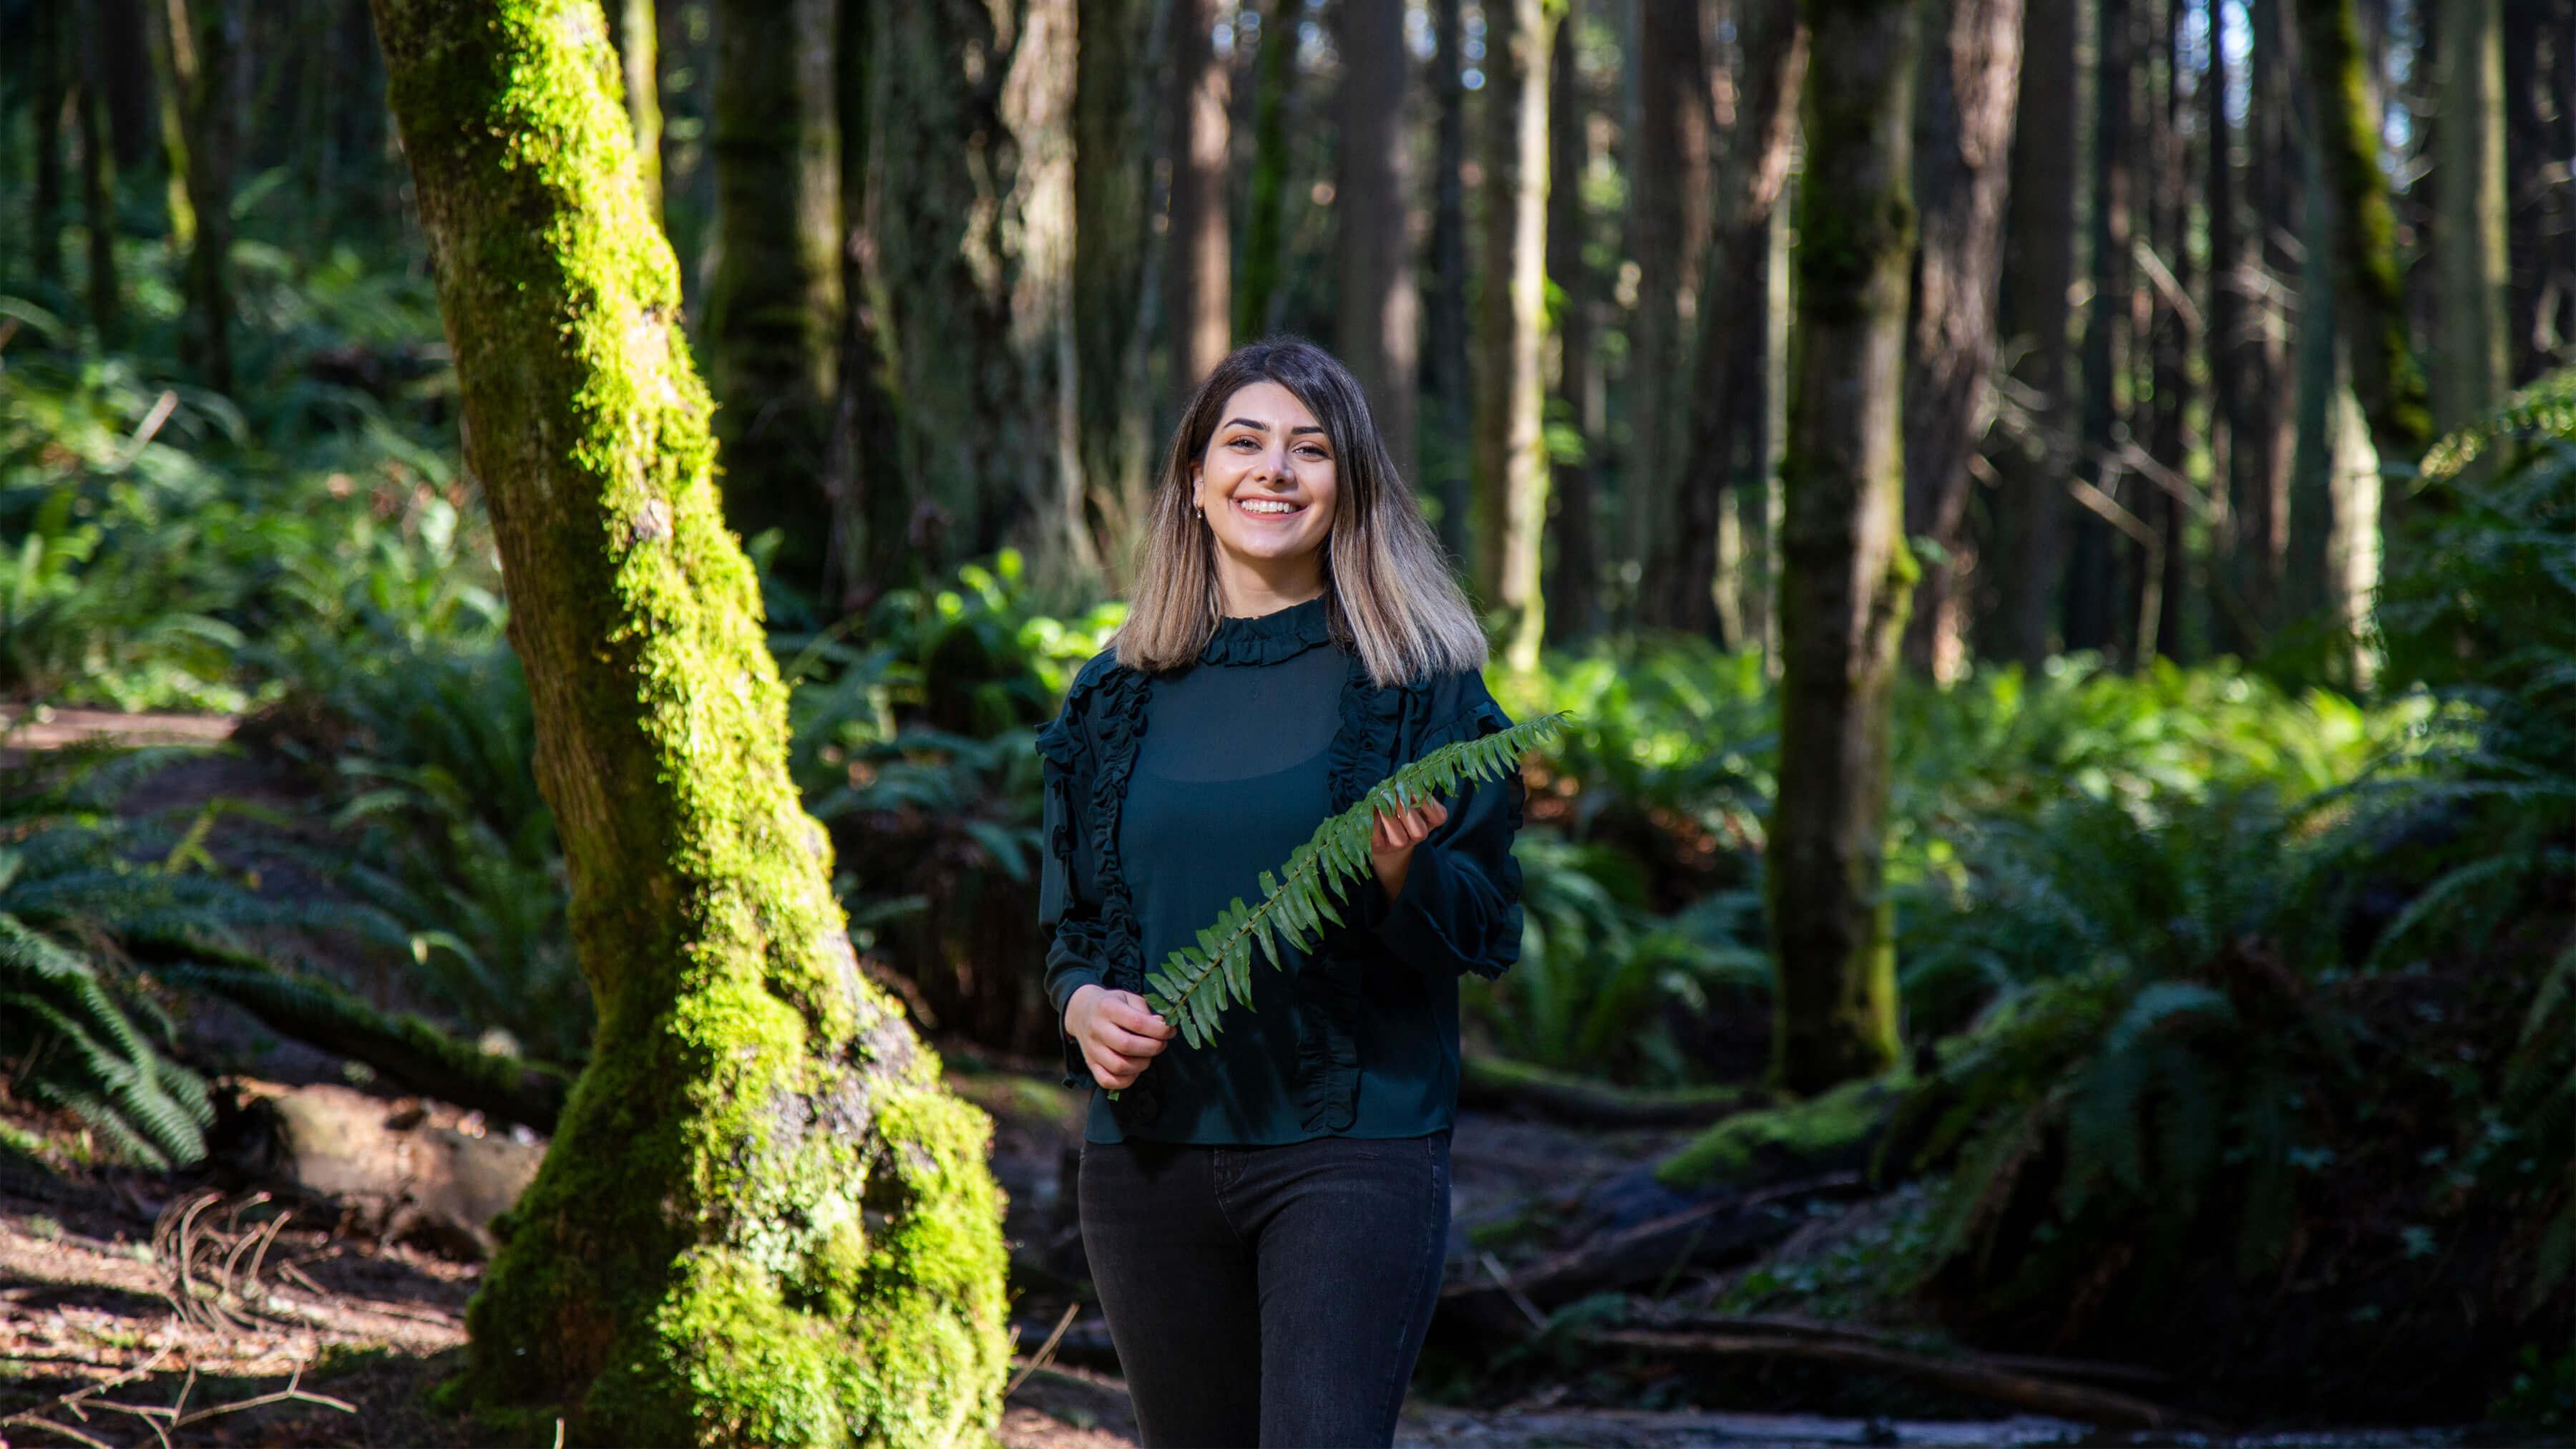 A woman stands in a forest holding a fern and smiling